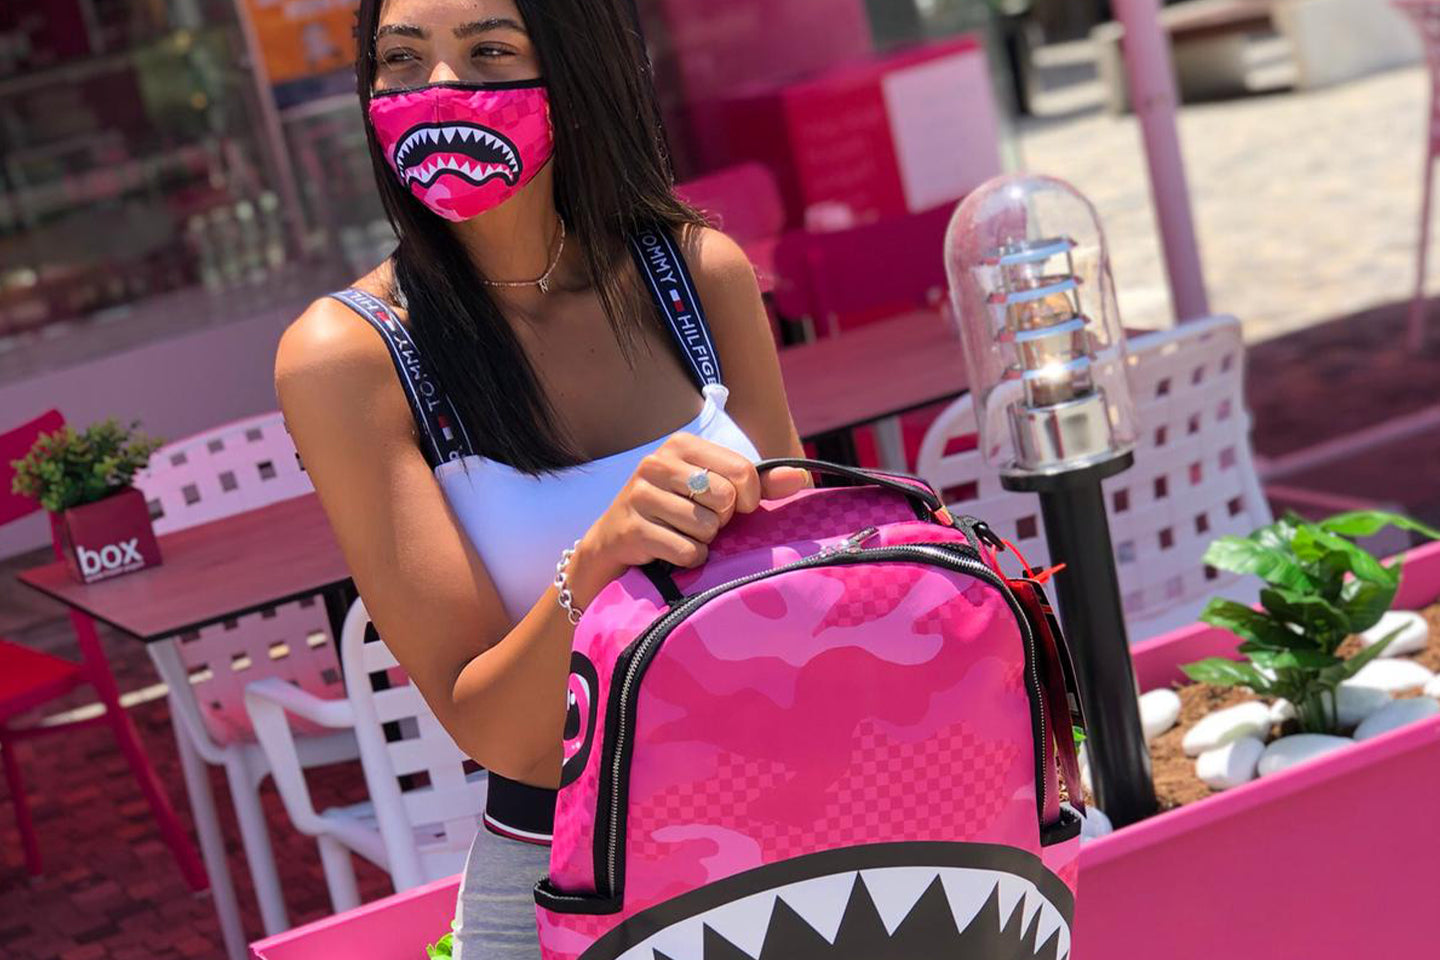 SPRAYGROUND DROP ZONE BACKPACK - Camo Bag w/ Pink Shark Mouth - Limited  Edition